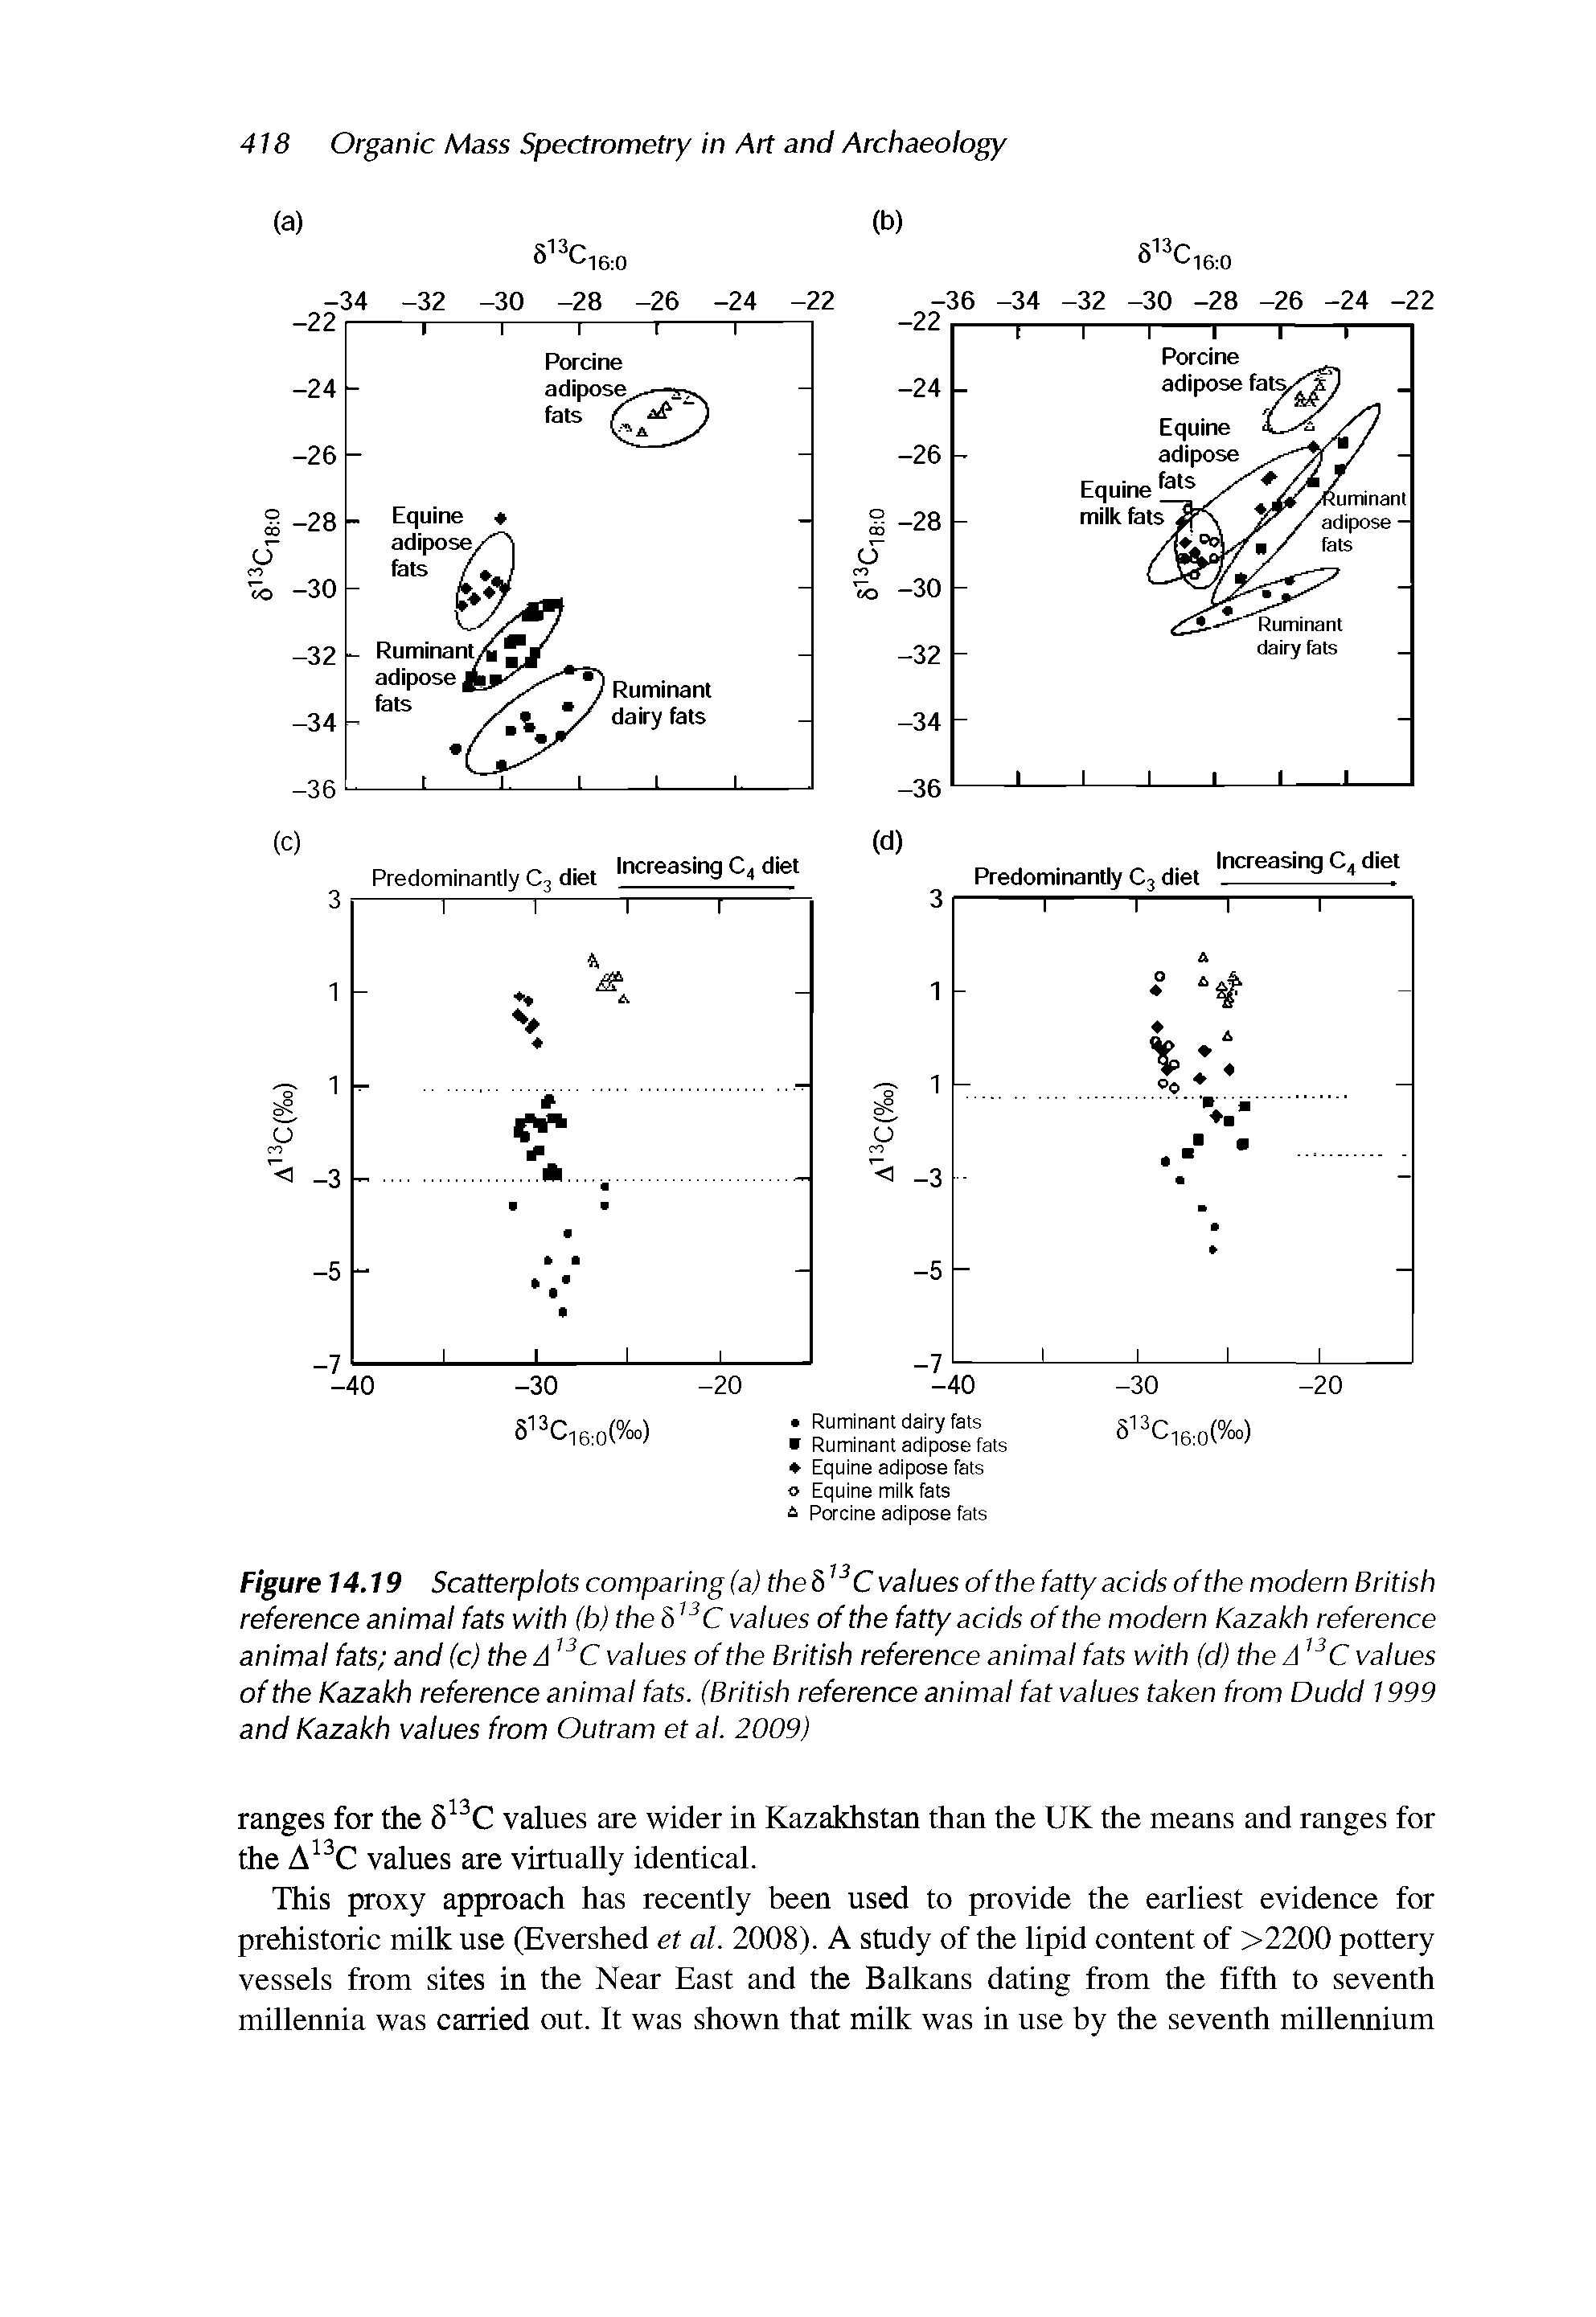 Figure 14.19 Scatterplots comparing (a) the 13C values of the fatty acids of the modern British reference animal fats with (b) the 813C values of the fatty acids of the modern Kazakh reference animal fats and (c) the A13C values of the British reference animal fats with (d) the A13C values of the Kazakh reference animal fats. (British reference animal fat values taken from Dudd 1999 and Kazakh values from Outram et al. 2009)...